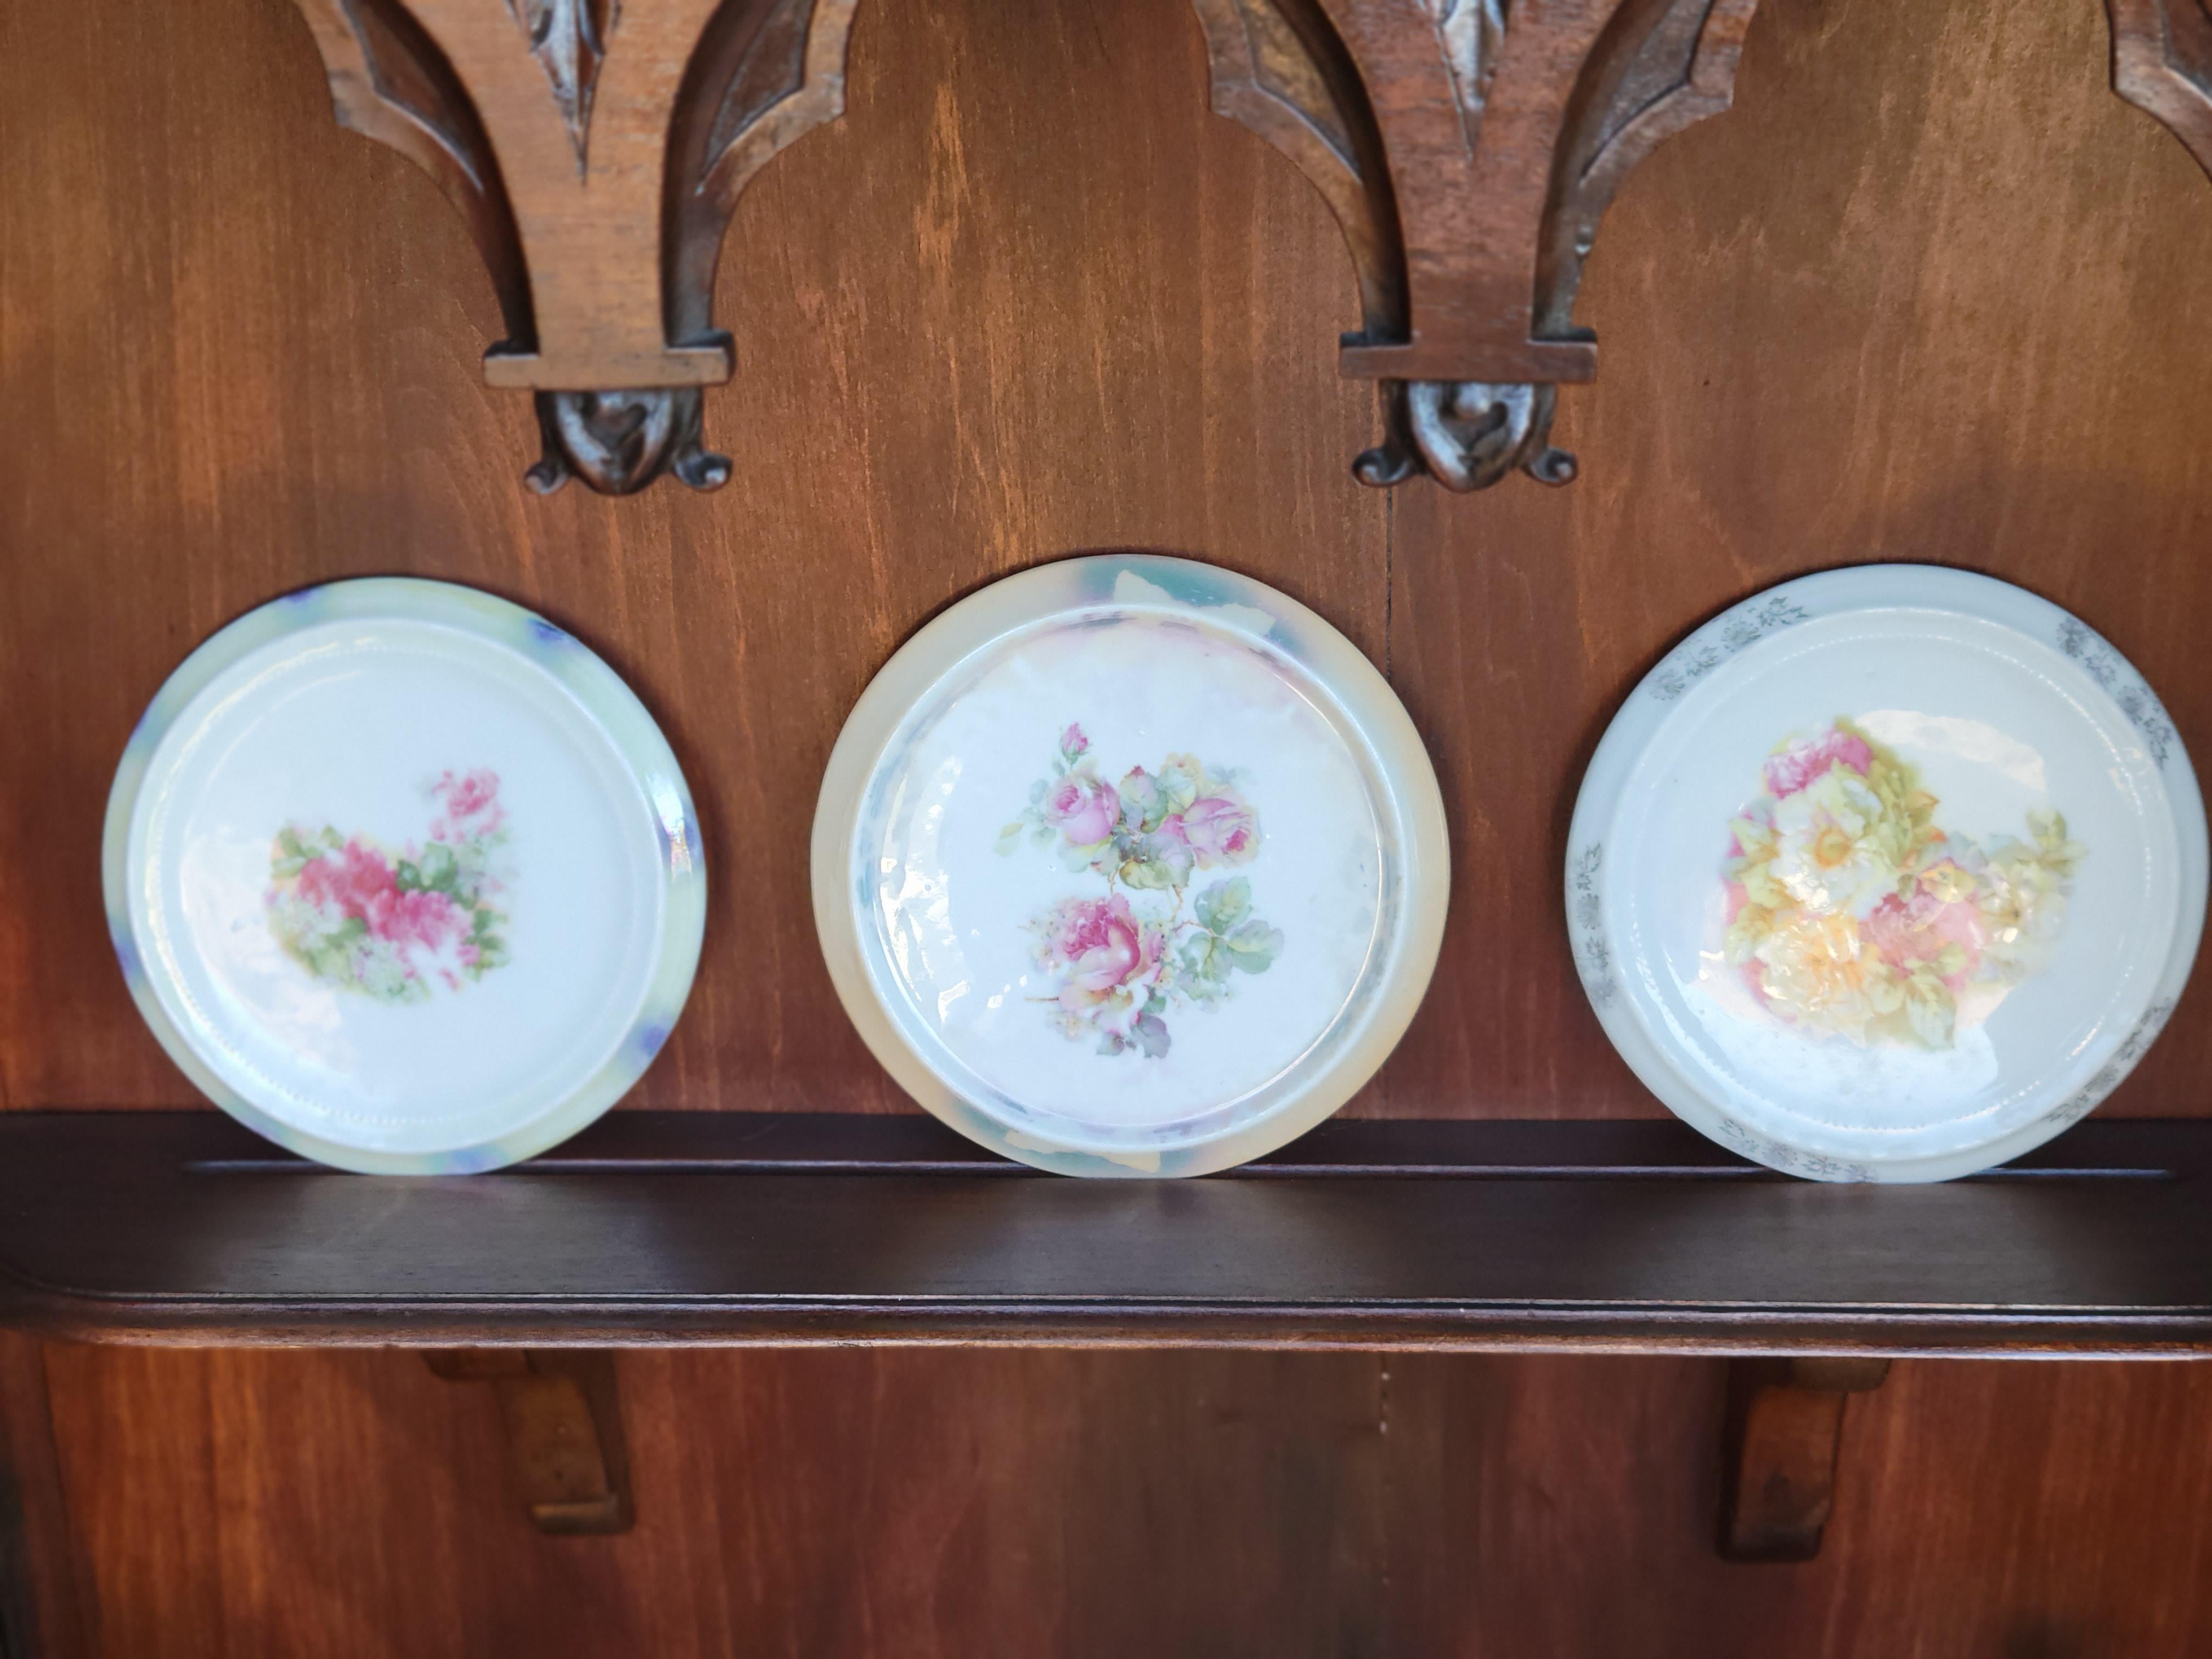 A set of (3) antique German porcelain tea / coffee pot trivets.
Each plate is a 6.5' in diameter and about 1